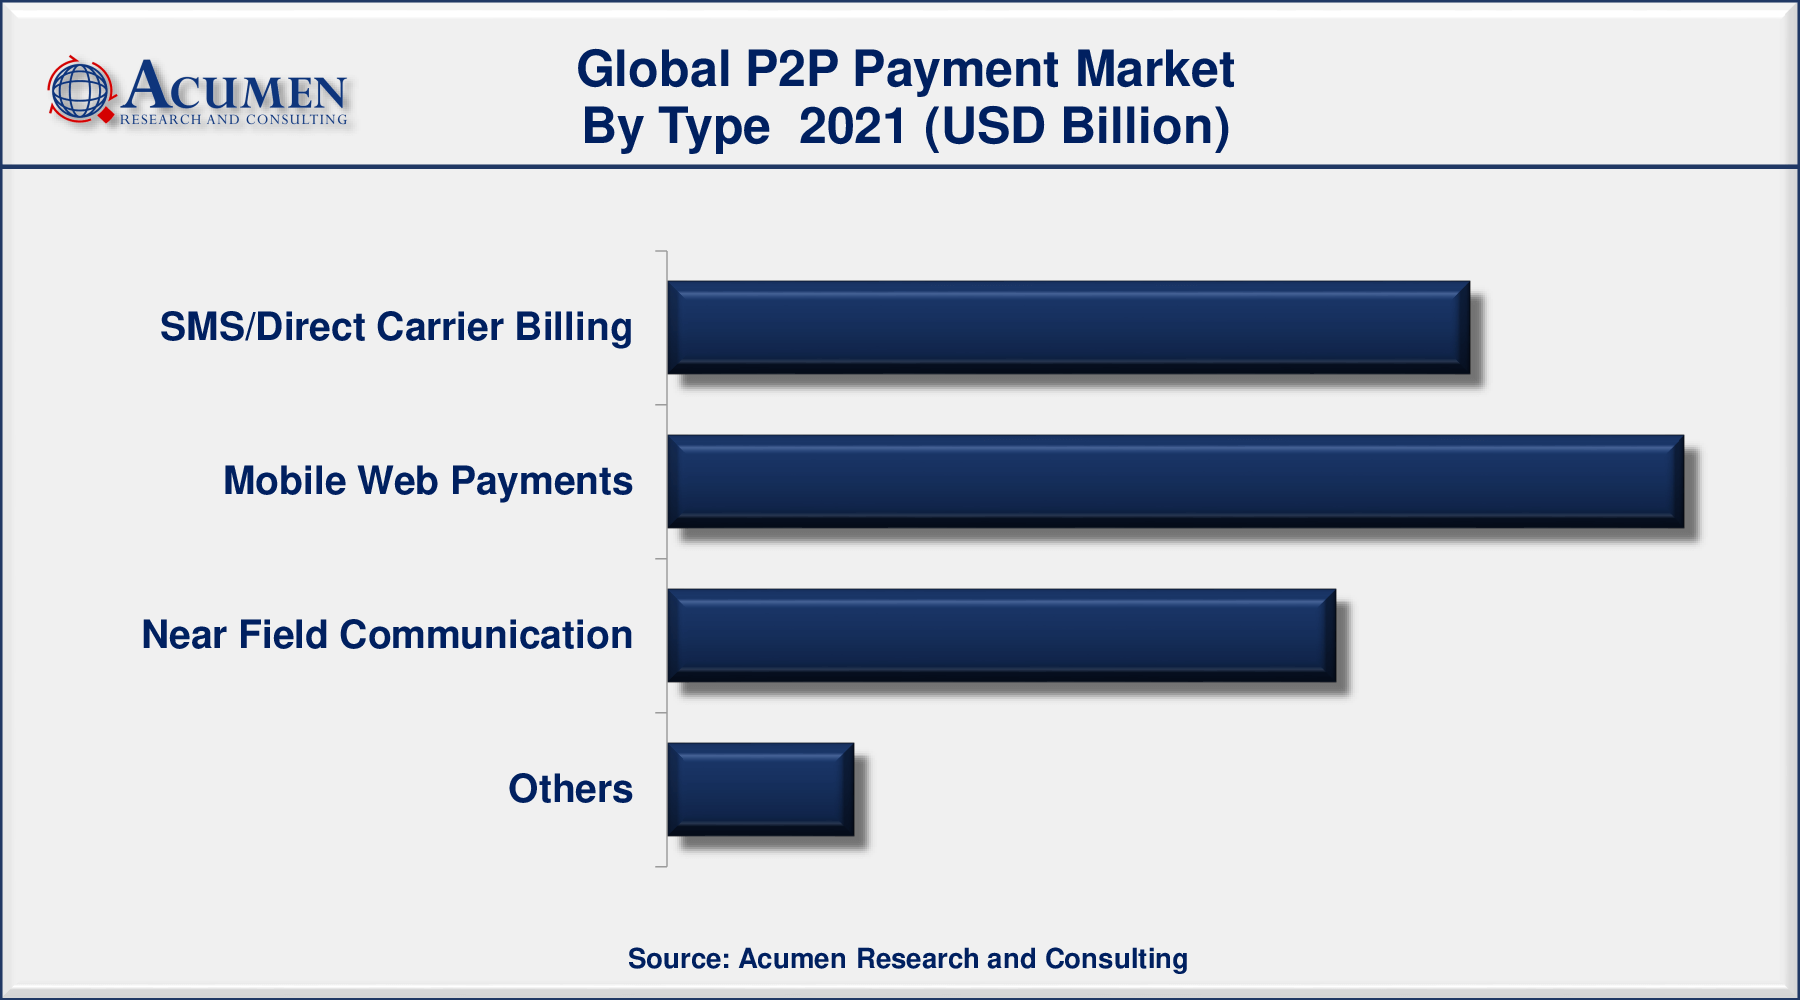 Global P2P payment market revenue is expected to increase by USD 9,135 billion by 2030, with a 19.7% CAGR from 2022 to 2030.